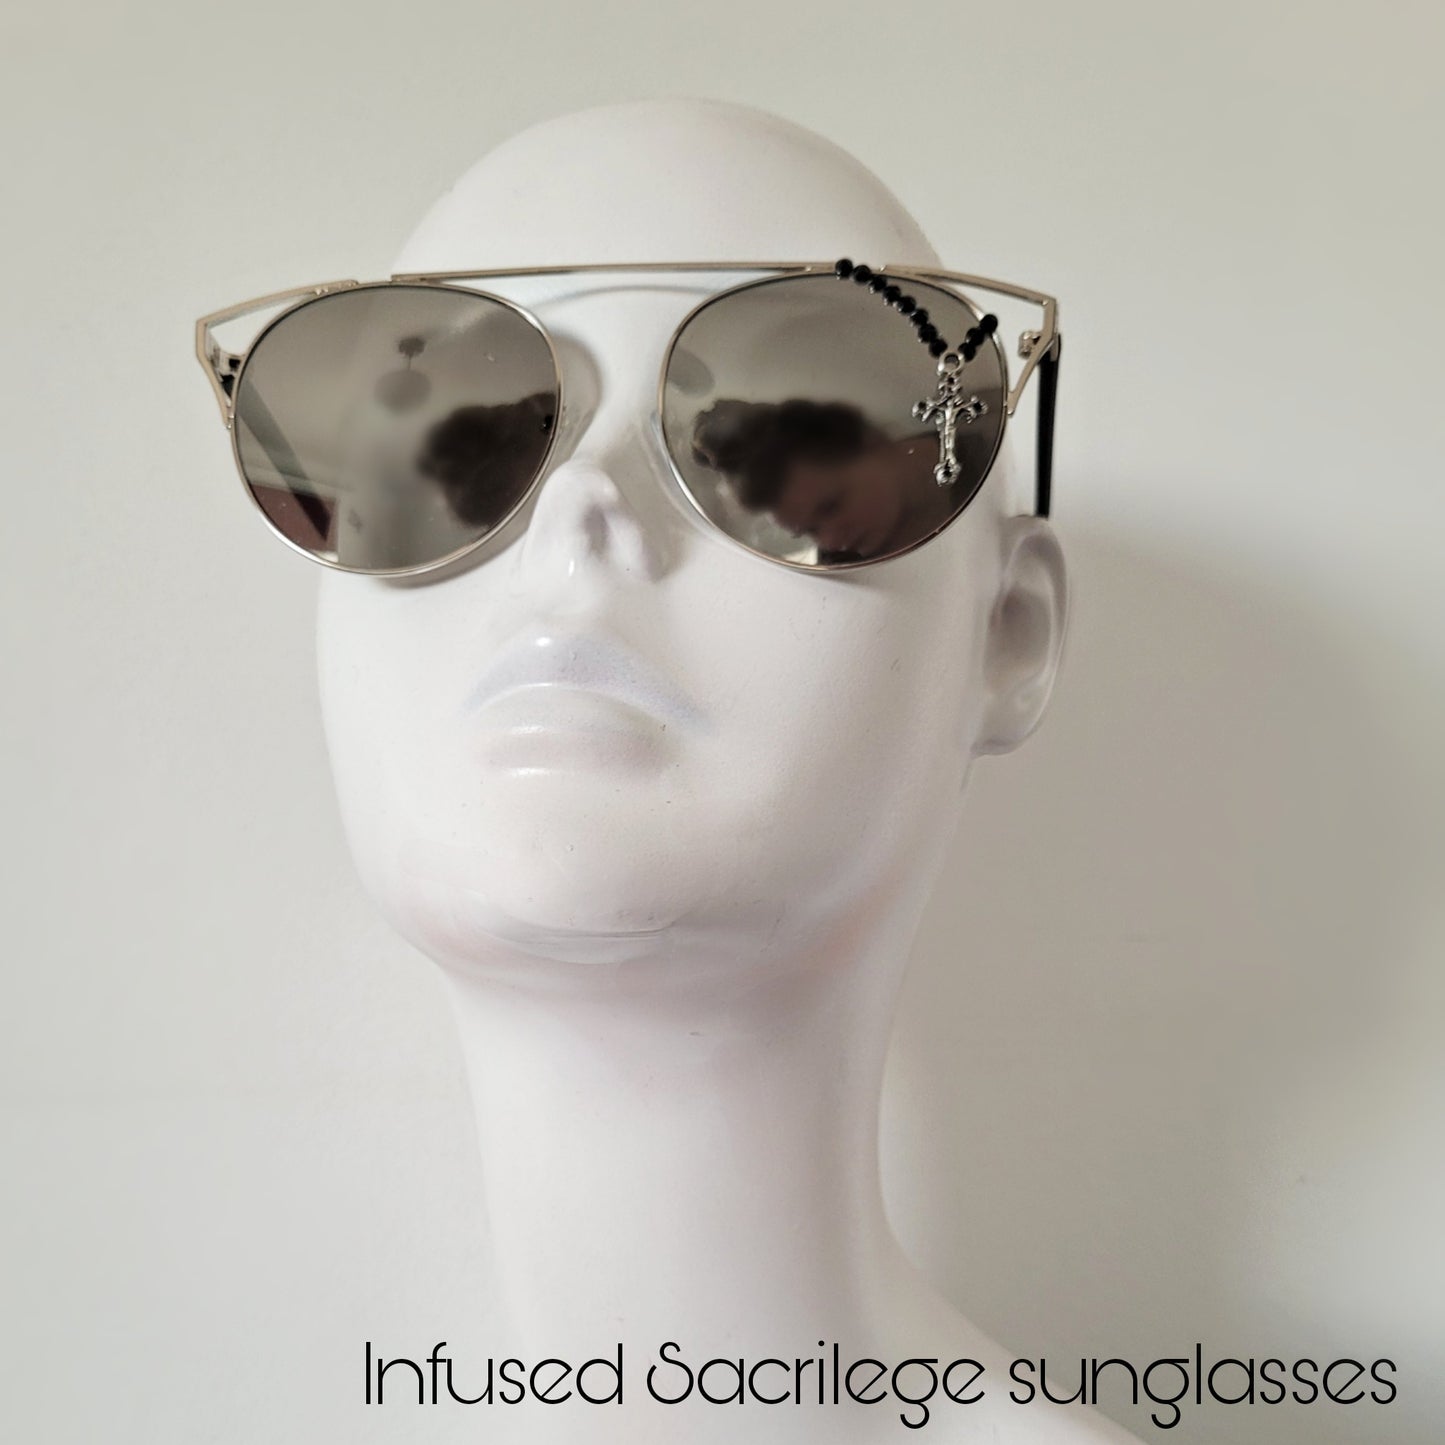 Sacrilegious collection: The Infused Sacrilege sunglasses, limited edition unisex model